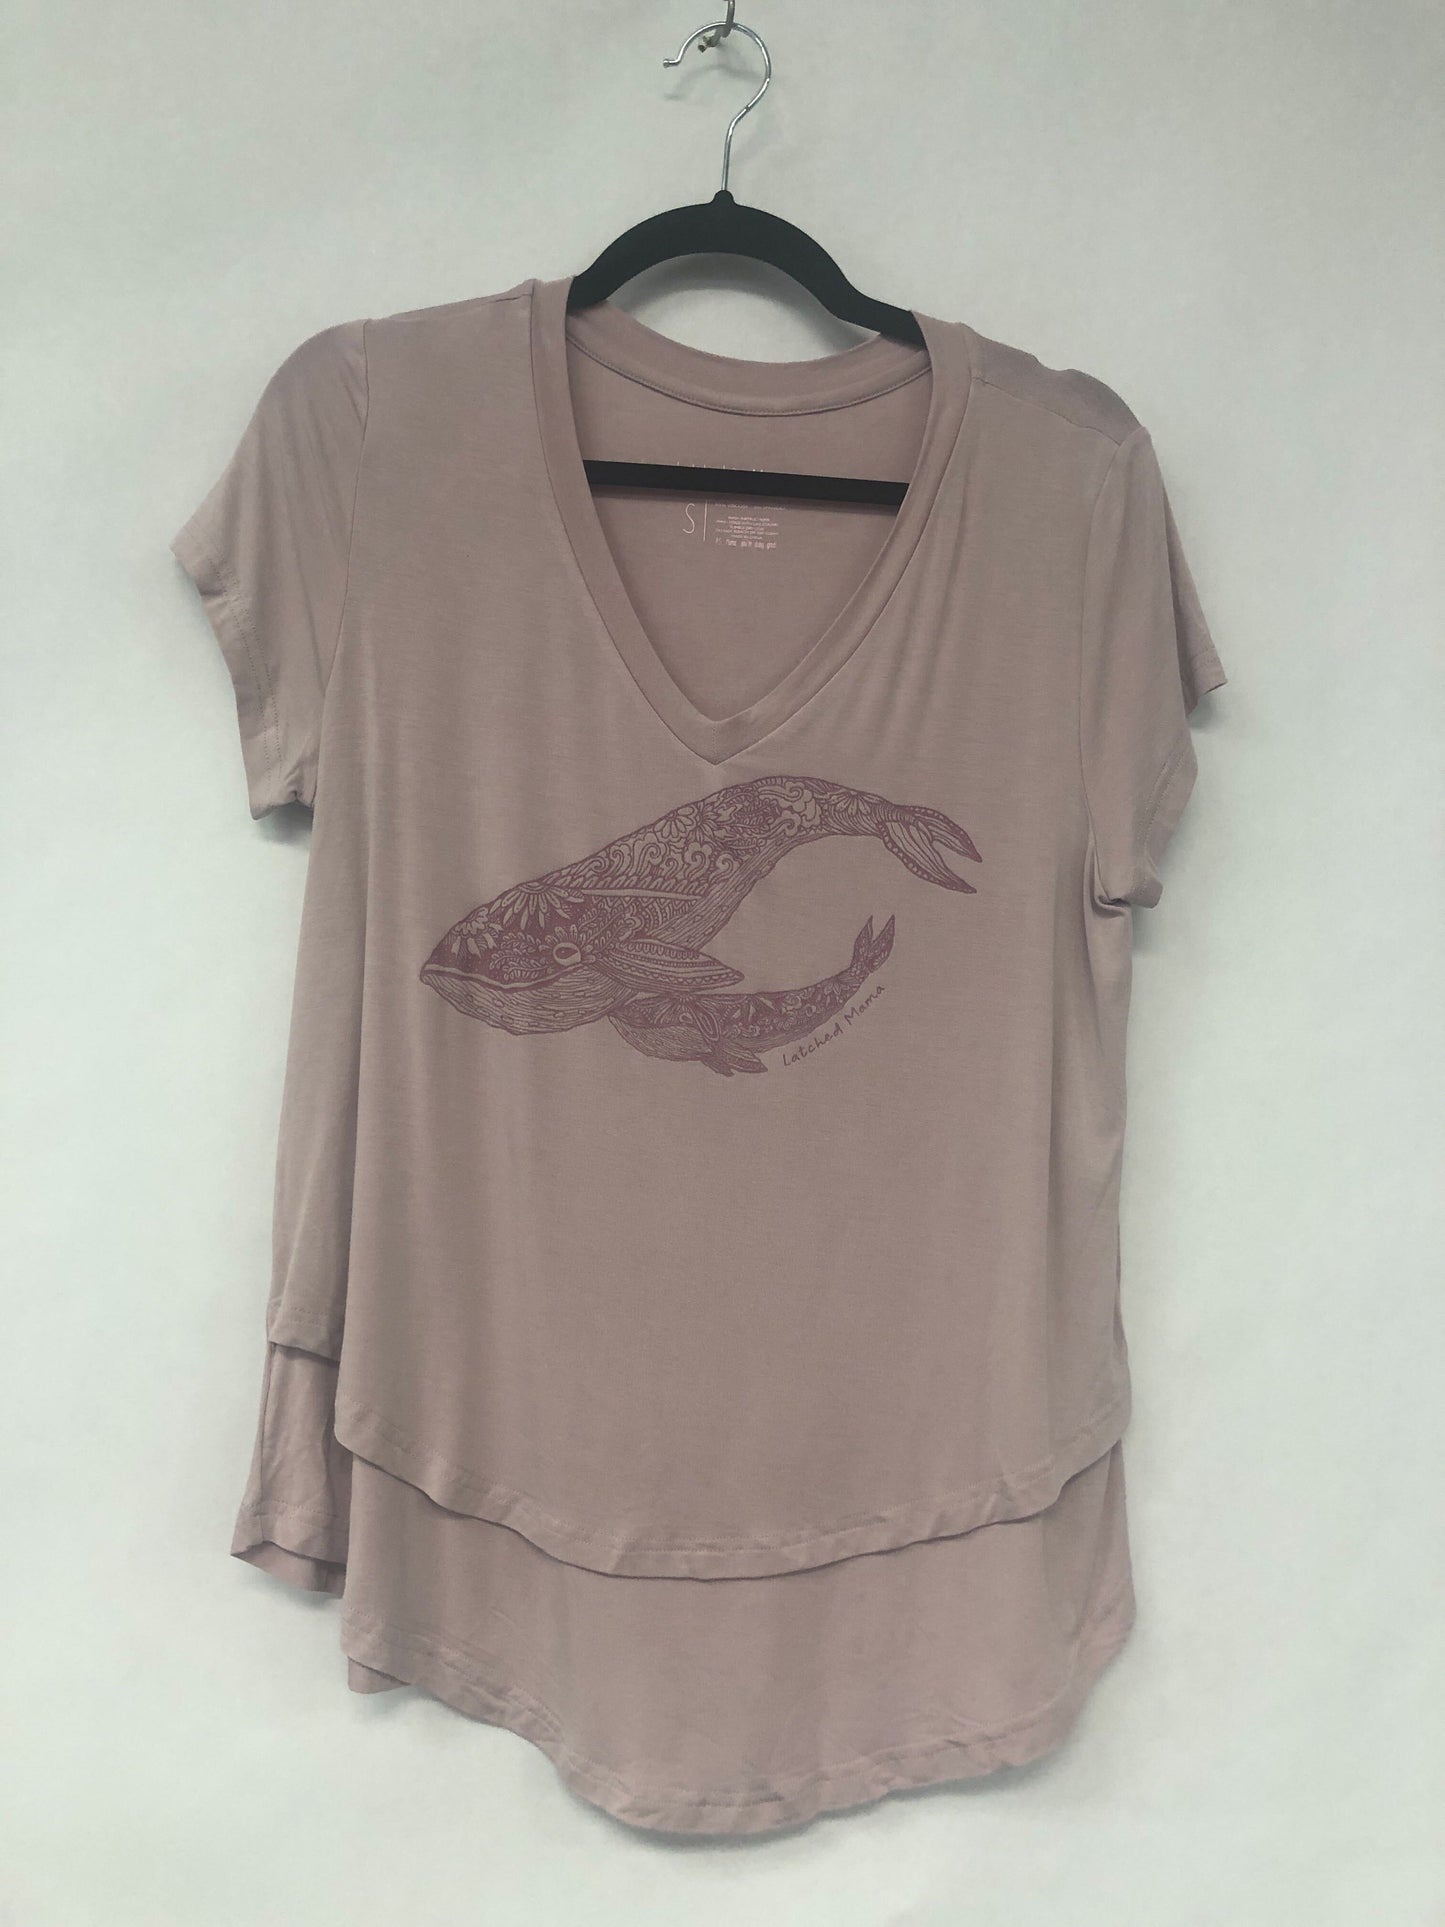 Outlet 6291 - Latched Mama Whimsical Whales Nursing Tee - Lavender Blush - Small